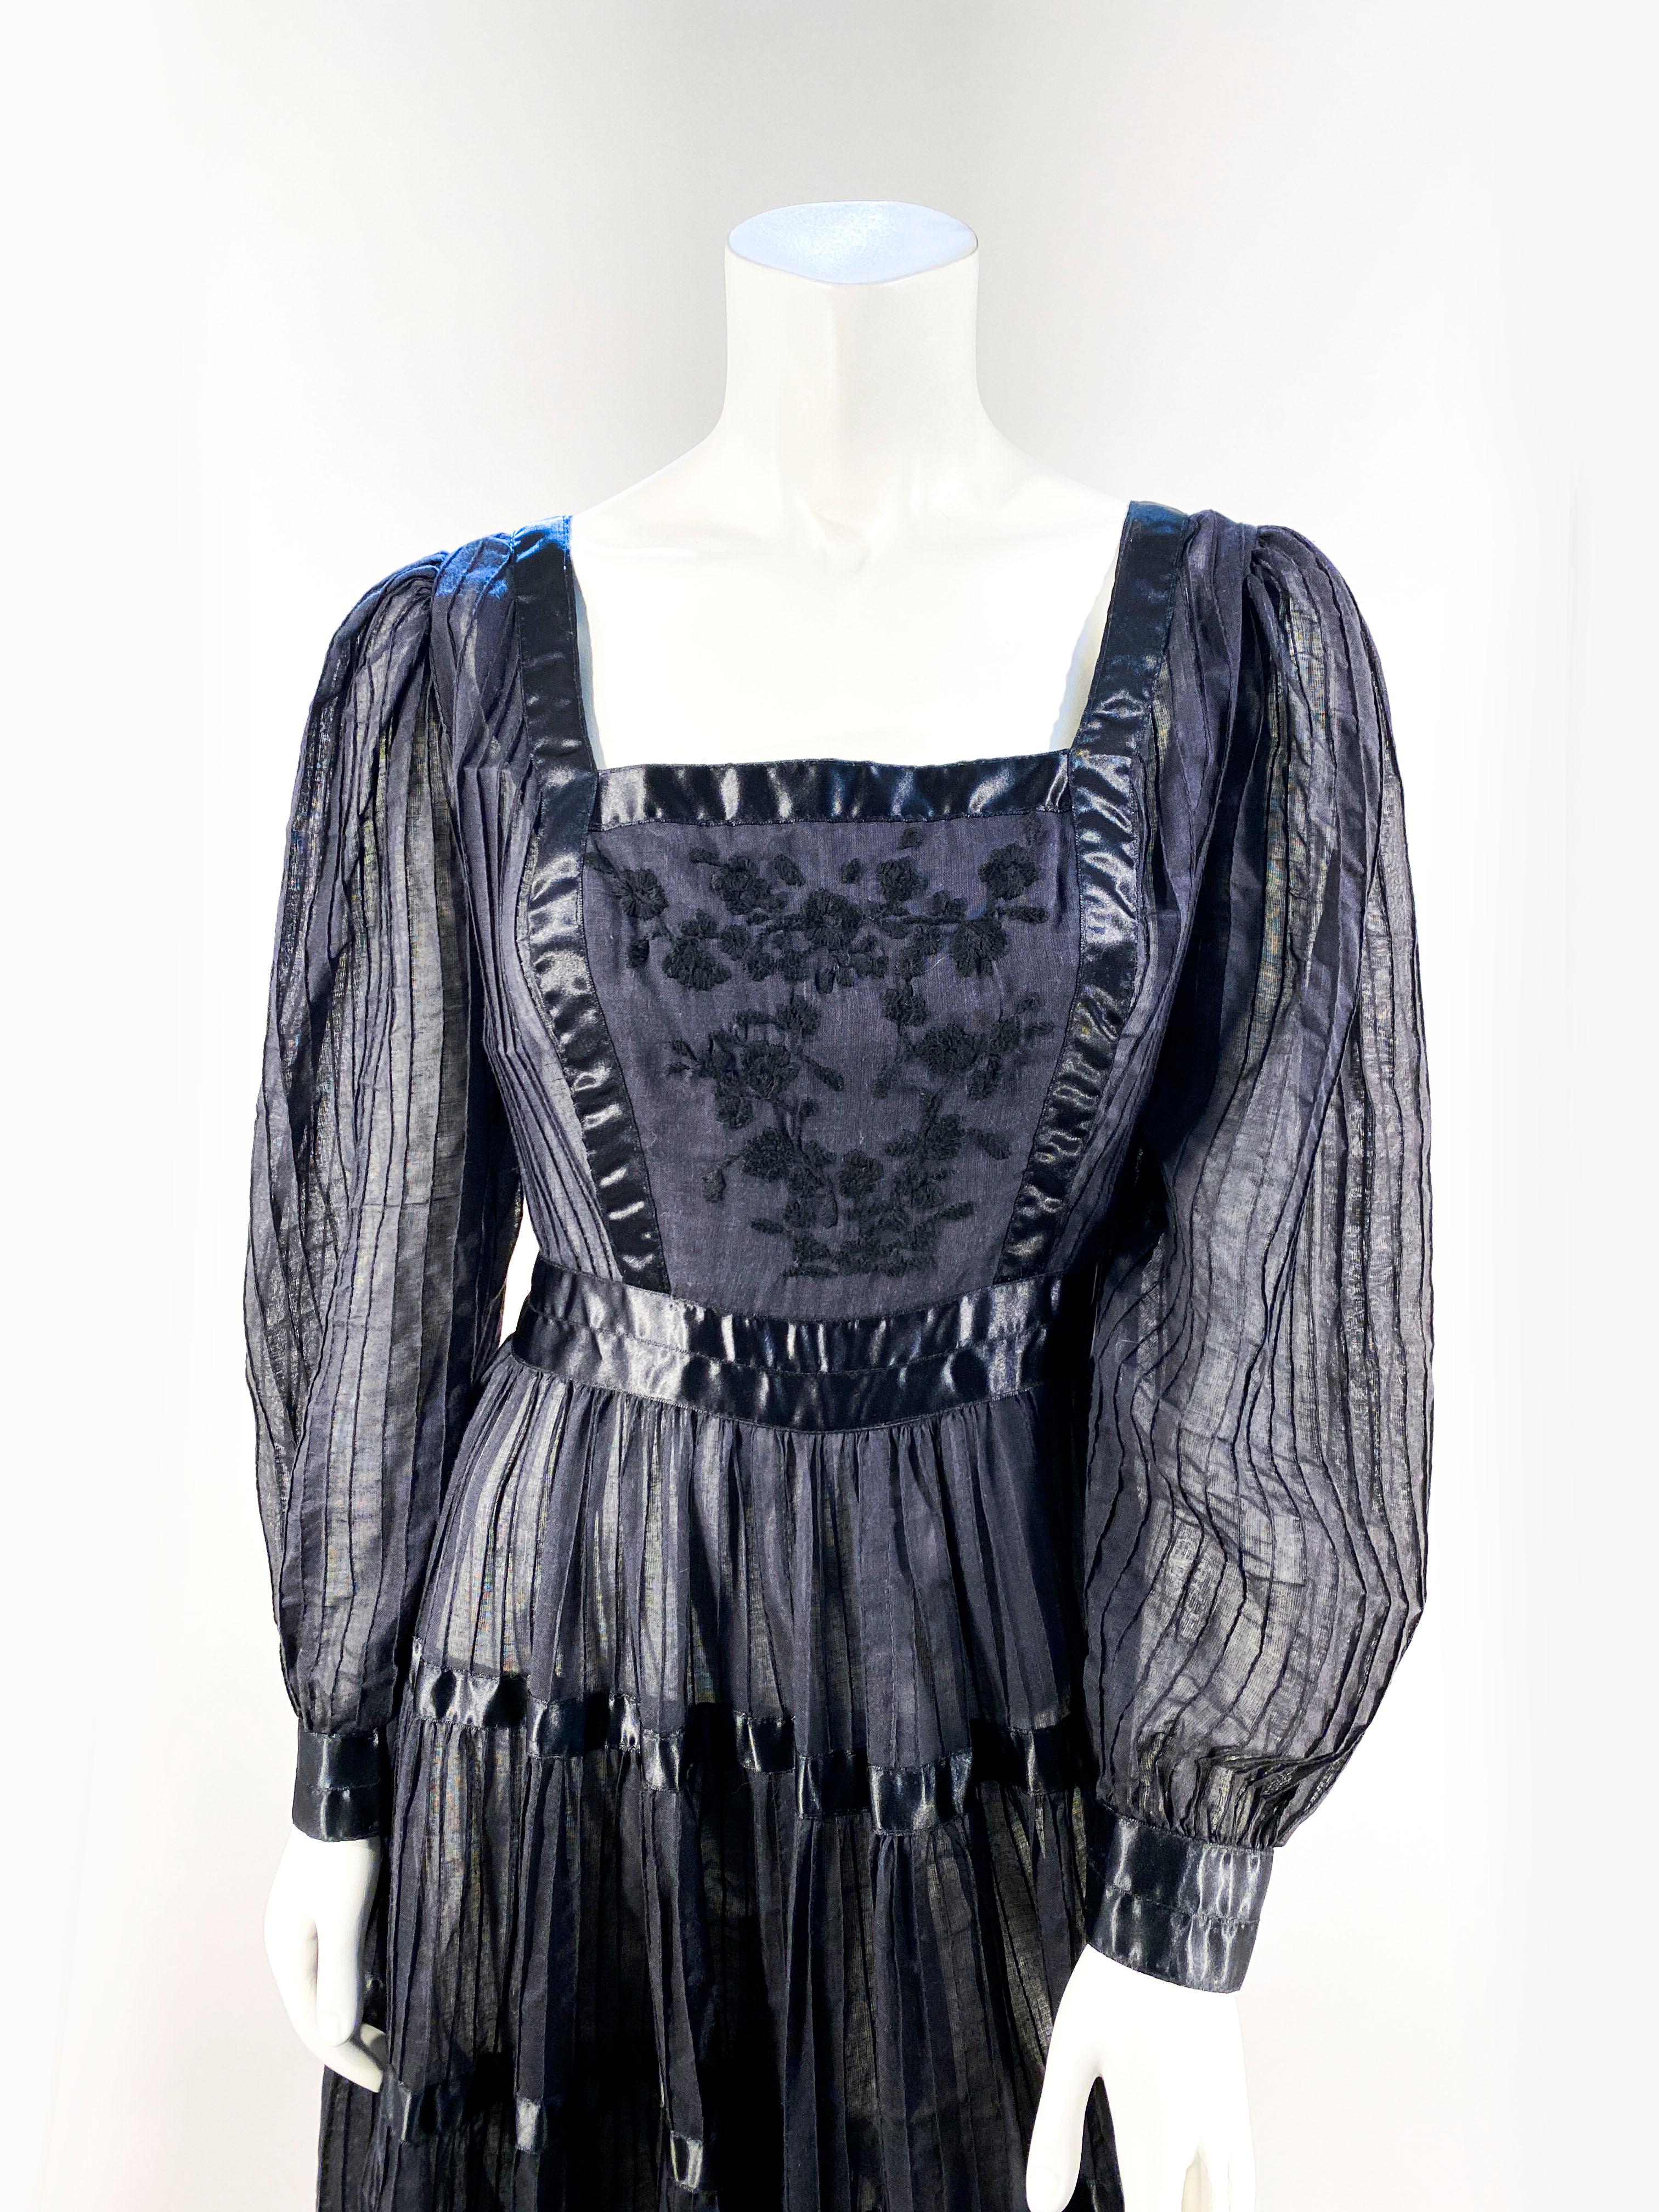 1960s Peasant/Bohemian Dress with a sheer pin pleated black cotton with satin striping, an embroidered torso, full circle skirt, and cuffed sleeves. 